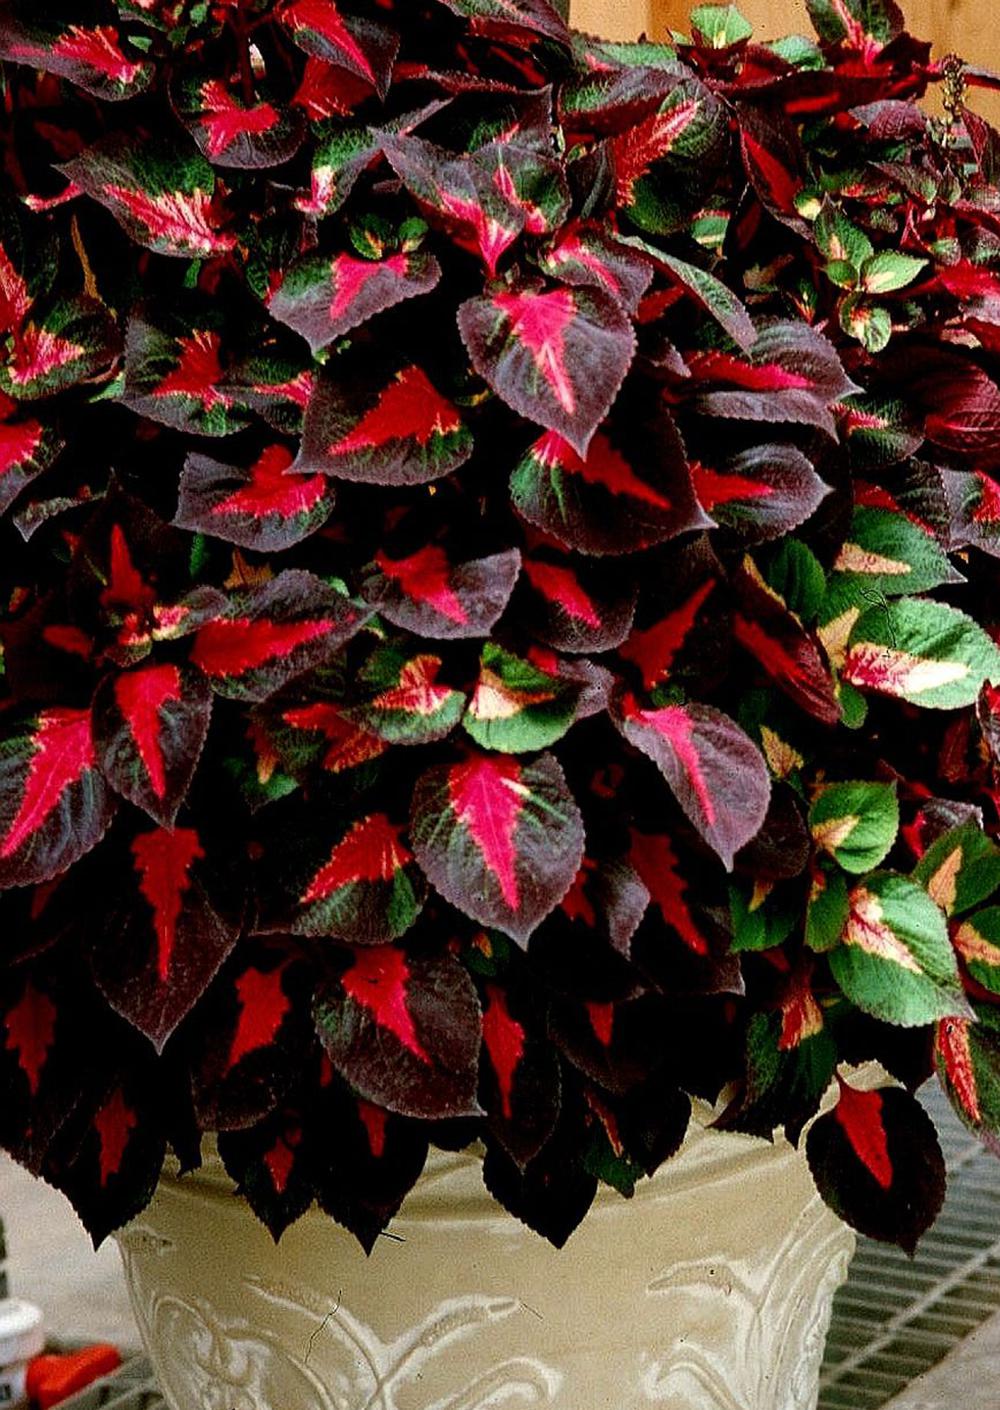 The bold, vibrant colors of the Magilla Perilla will add a tropical flair to any style garden.